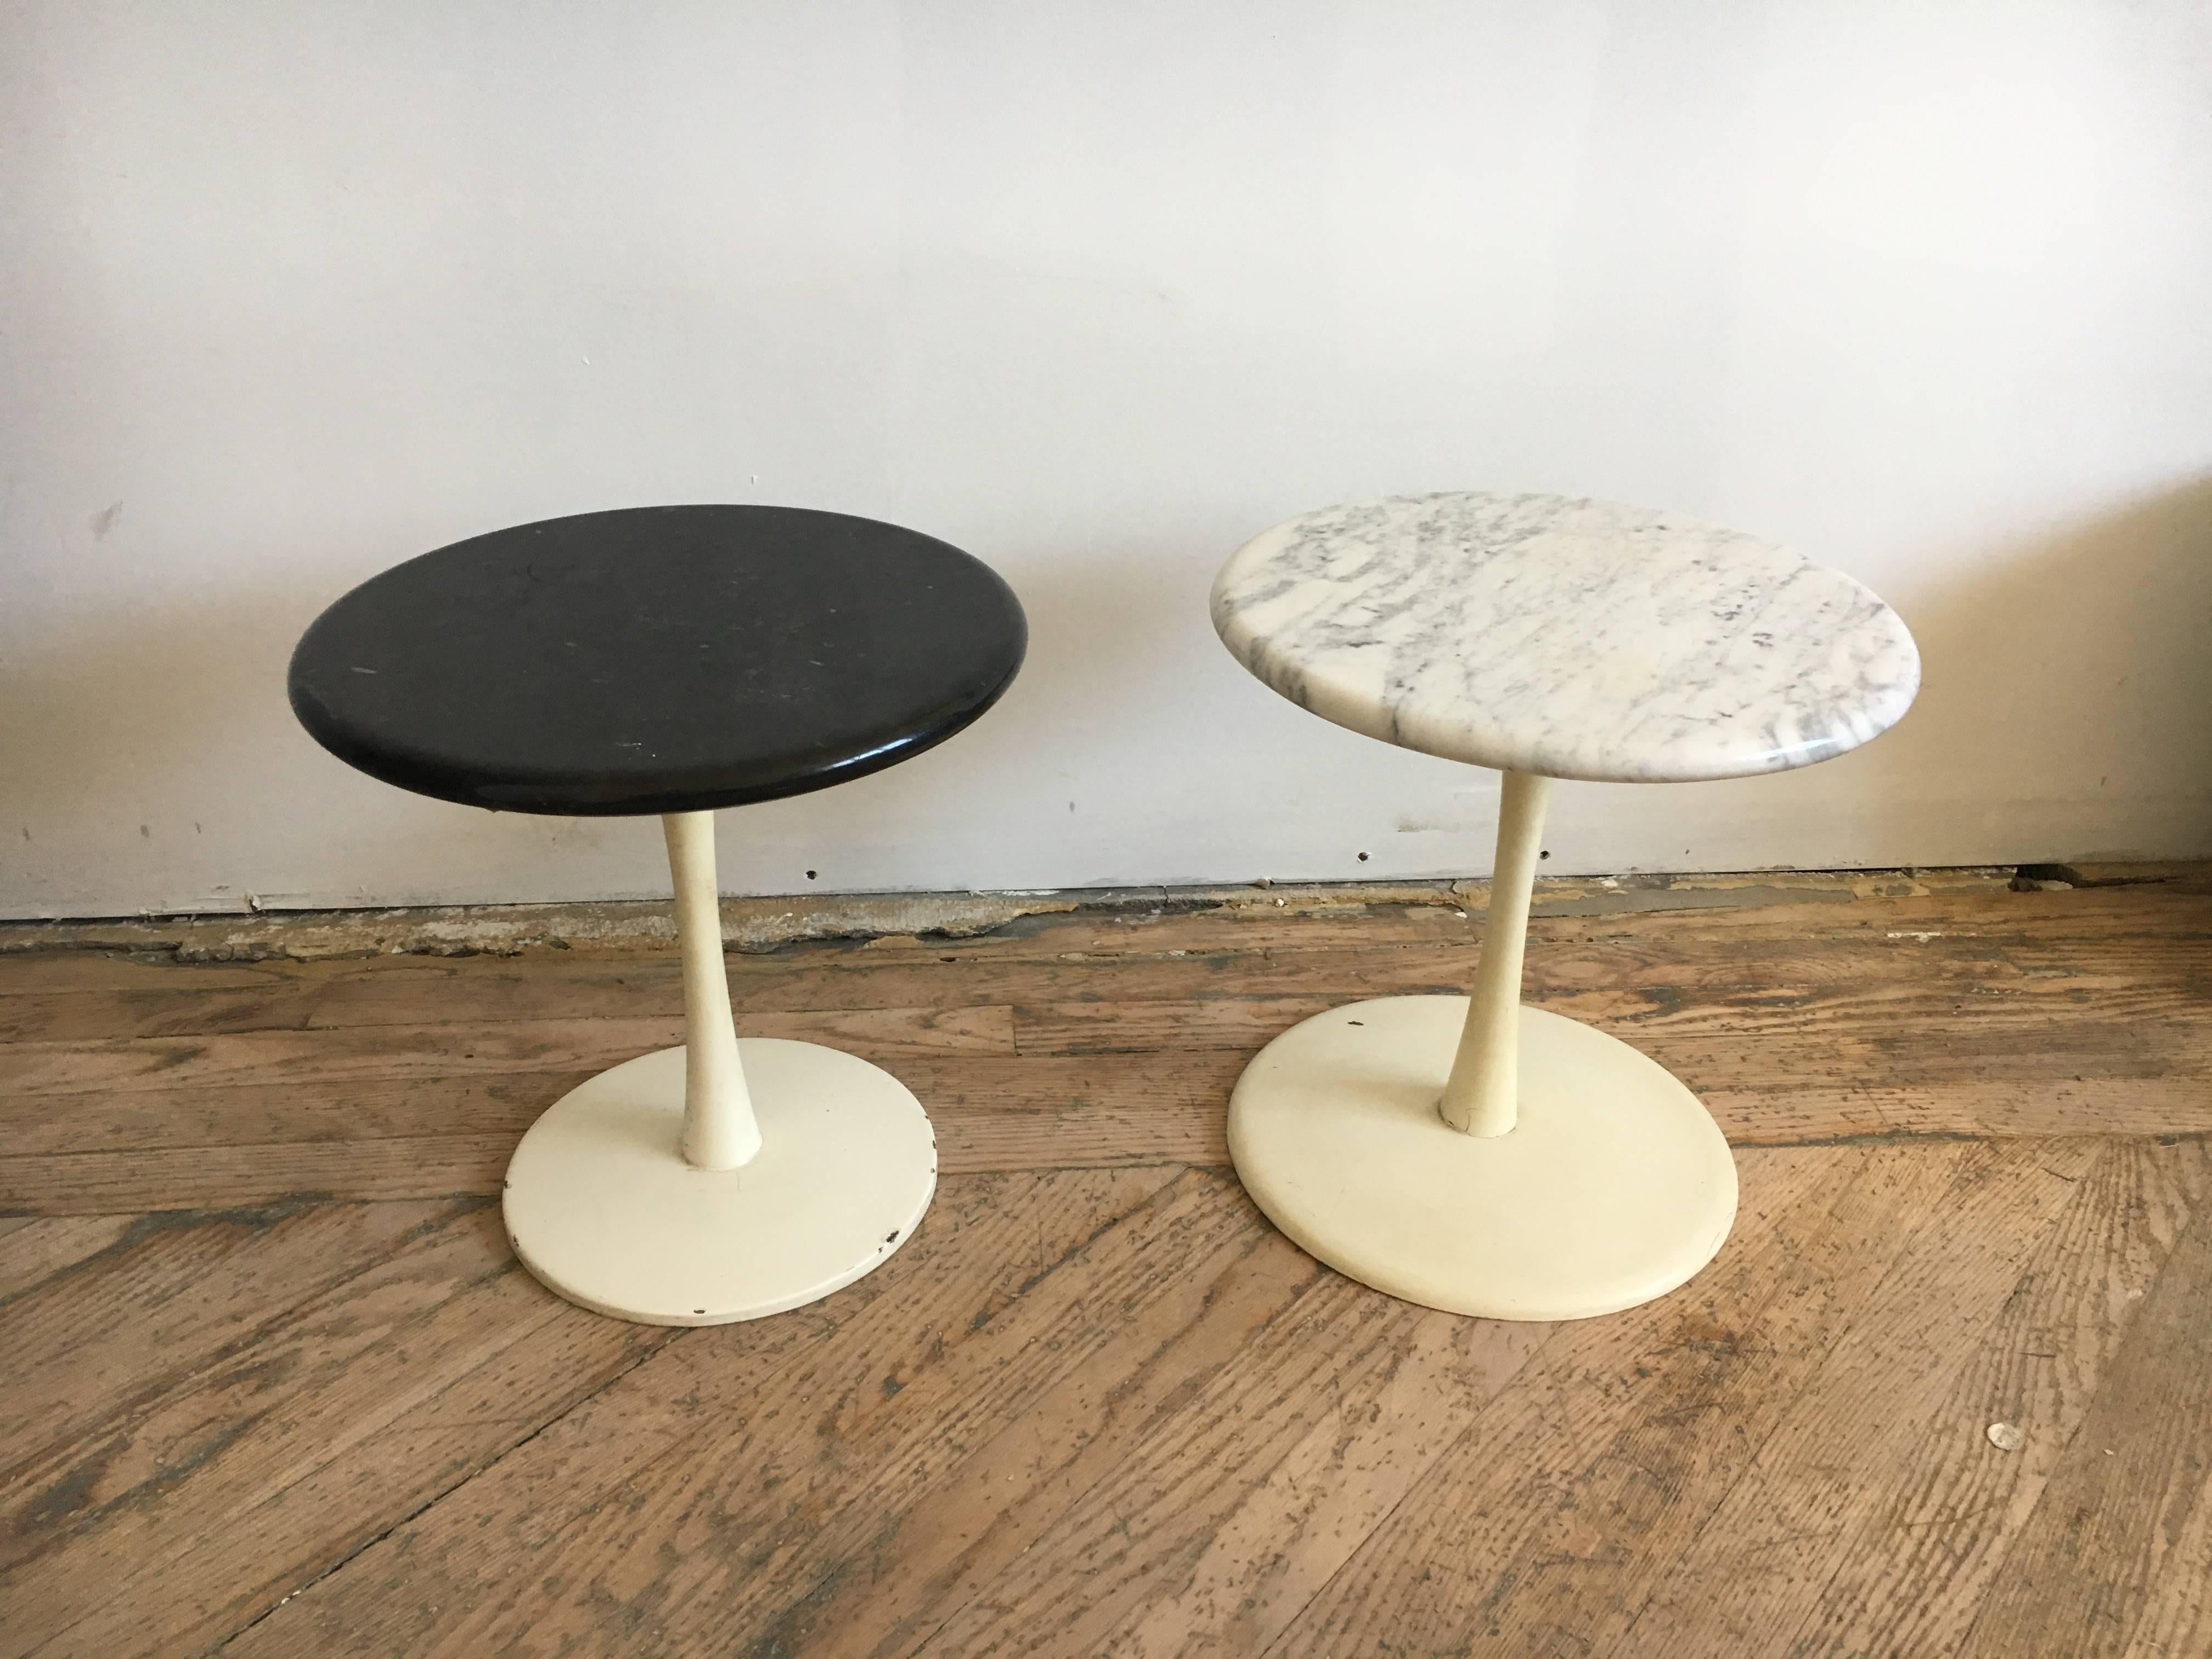 Pair of occasional tables designed by Erwin and Estelle Laverne.

Laverne originals.
USA, circa 1960.
Black & white marble, enameled steel.

